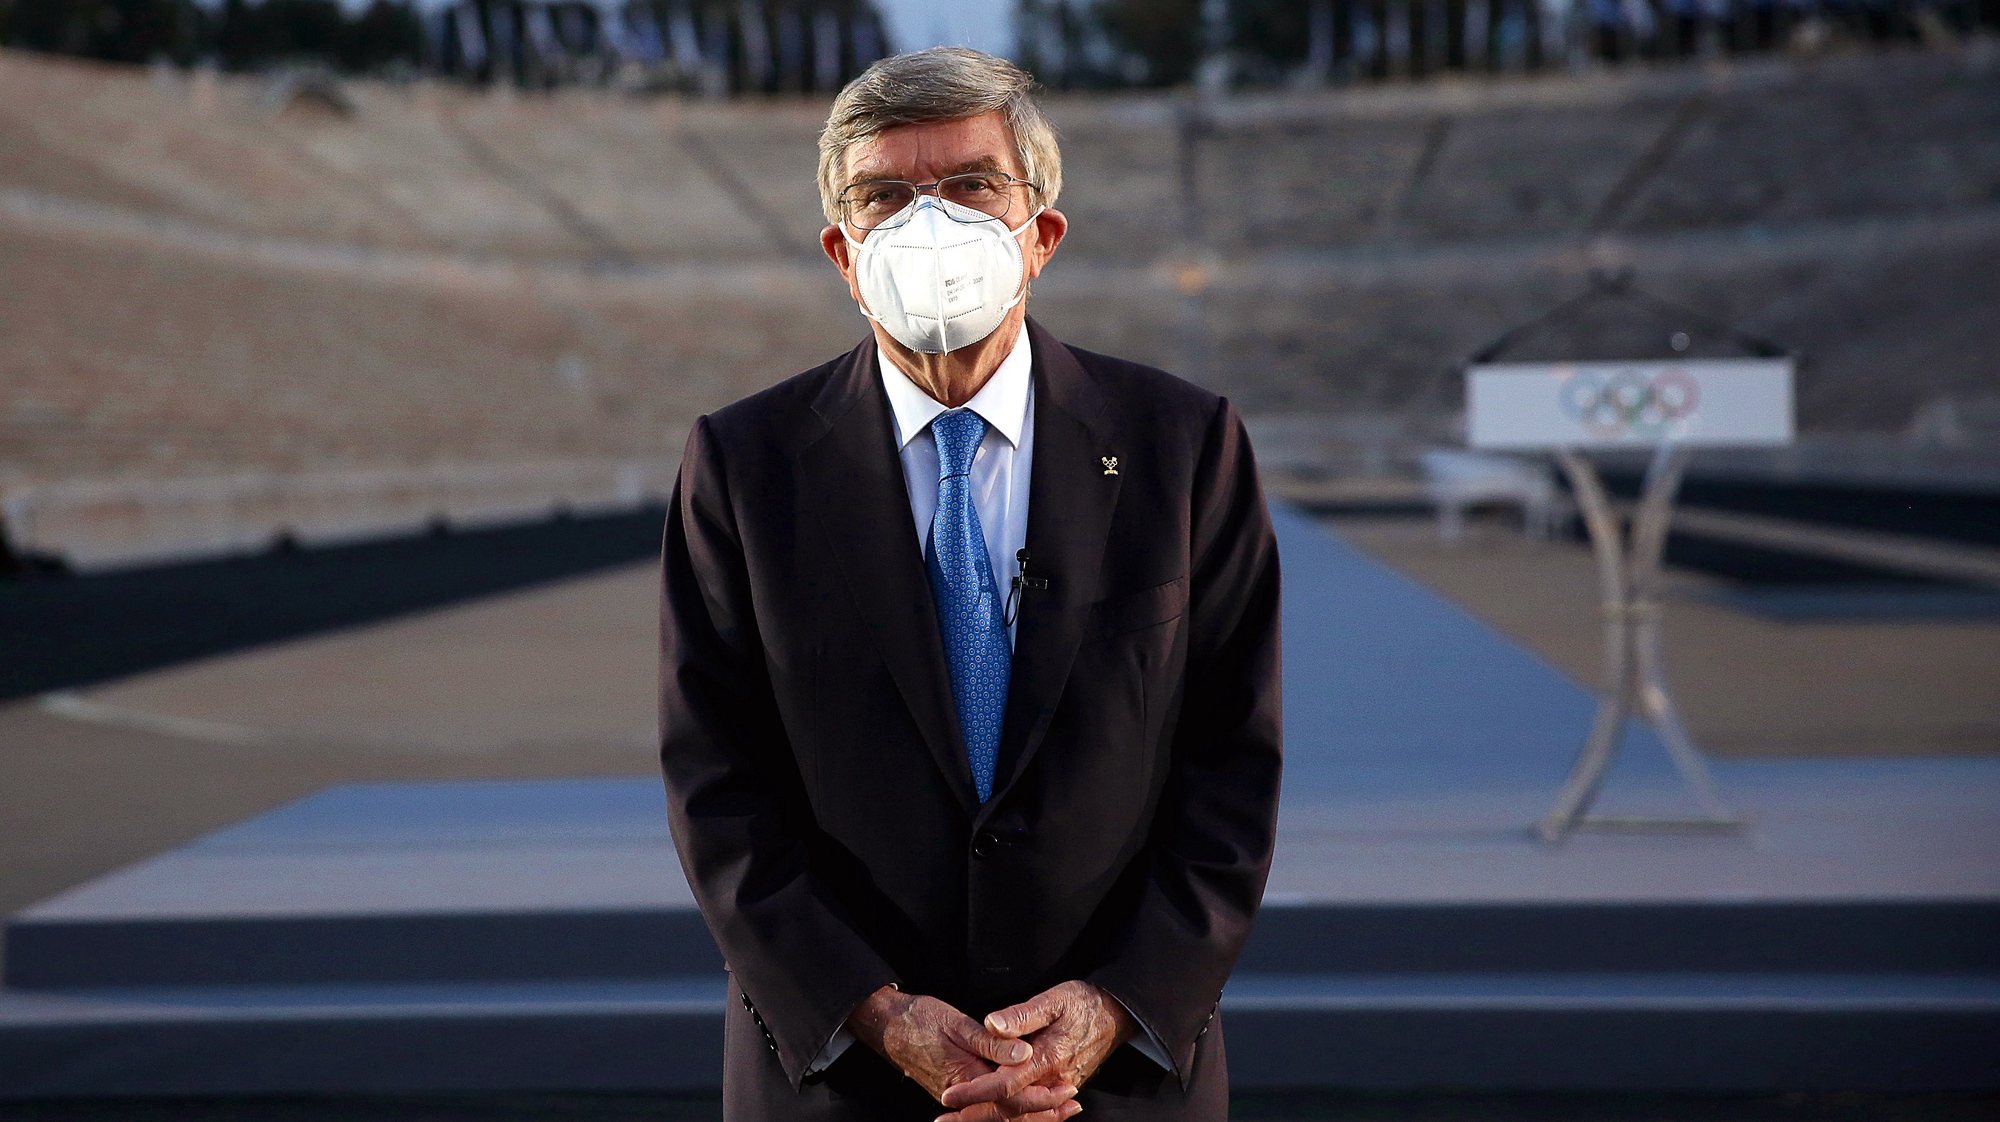 epa09105362 International Olympic Committee (IOC) president Thomas Bach of Germany wearing a protective face mask stands in the Panathenaic Stadium, venue of the first modern Olympic Games in 1896, in Athens, Greece, 29 March 2021. Bach visits Athens to attend the ceremony for the inauguration of the new lighting of the Panathenaic Stadium.  EPA/ORESTIS PANAGIOTOU